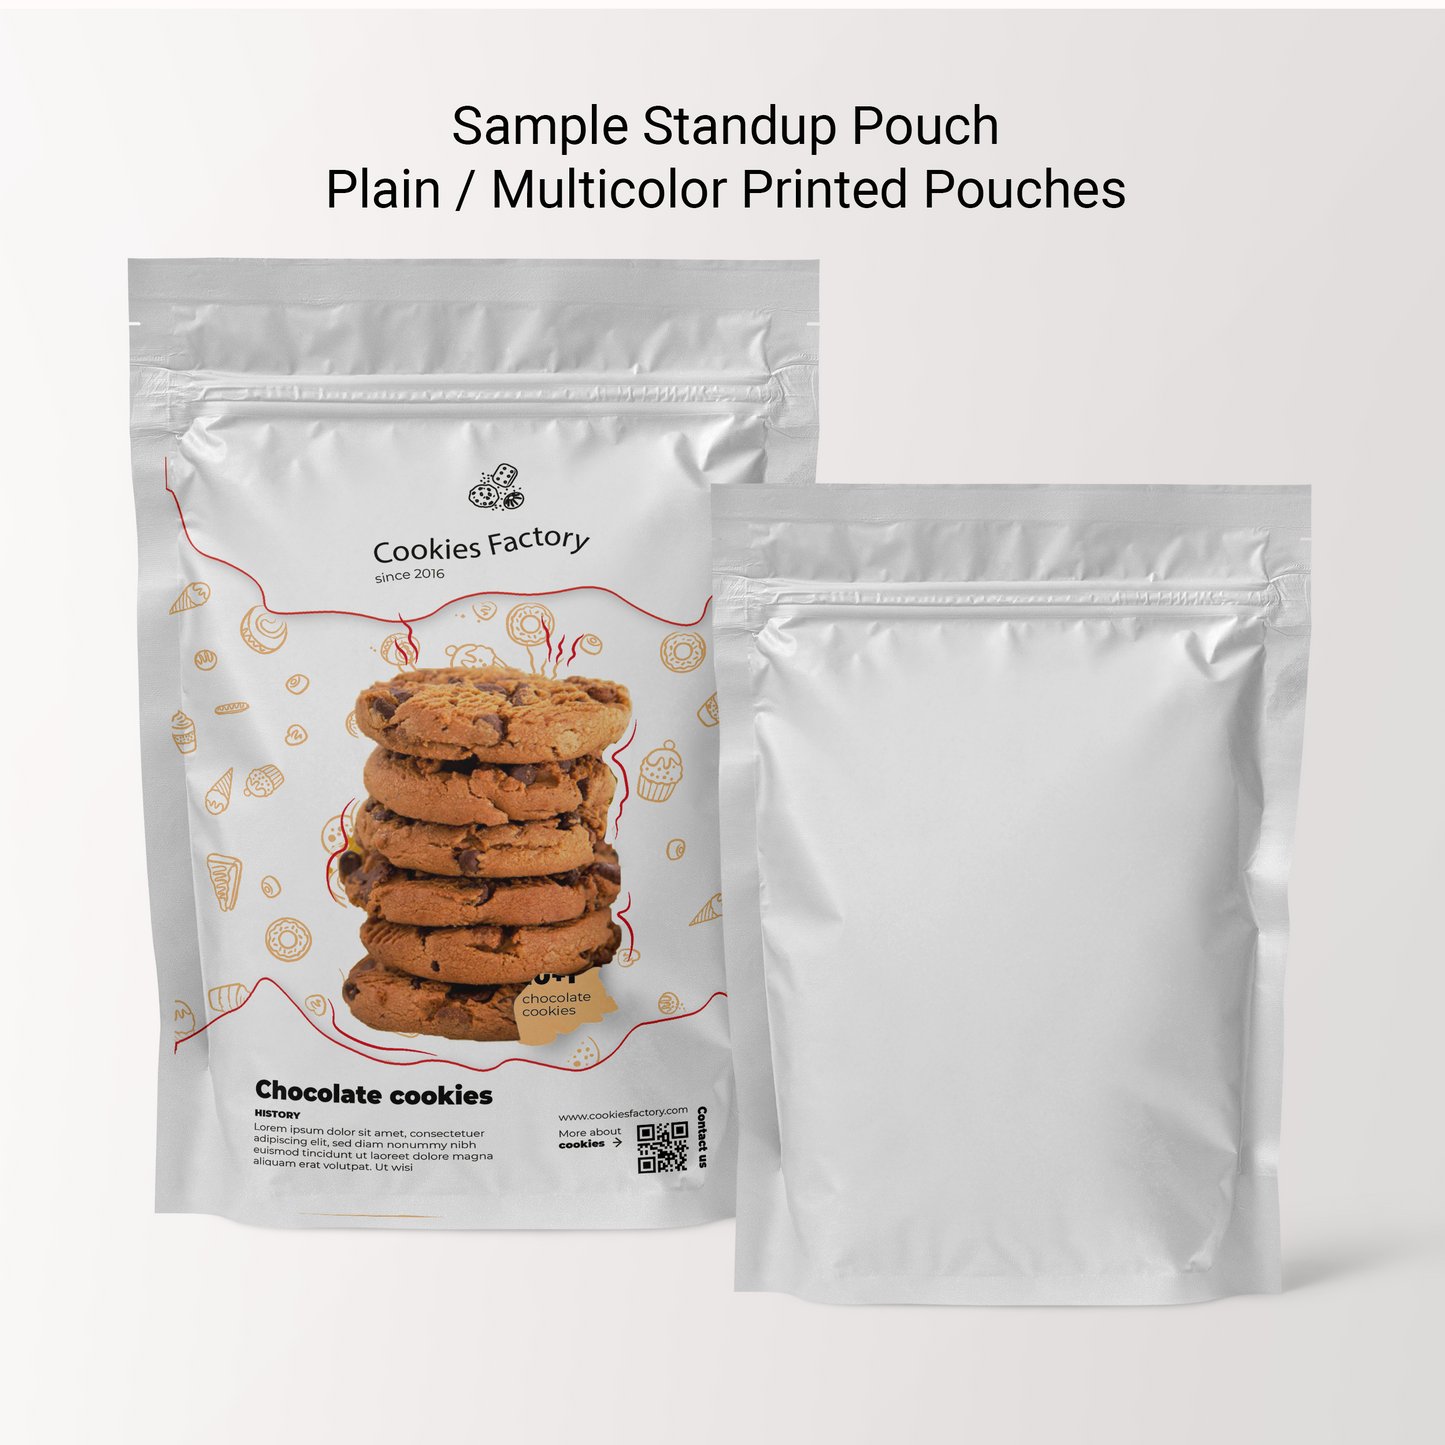 Sample Standup Pouches